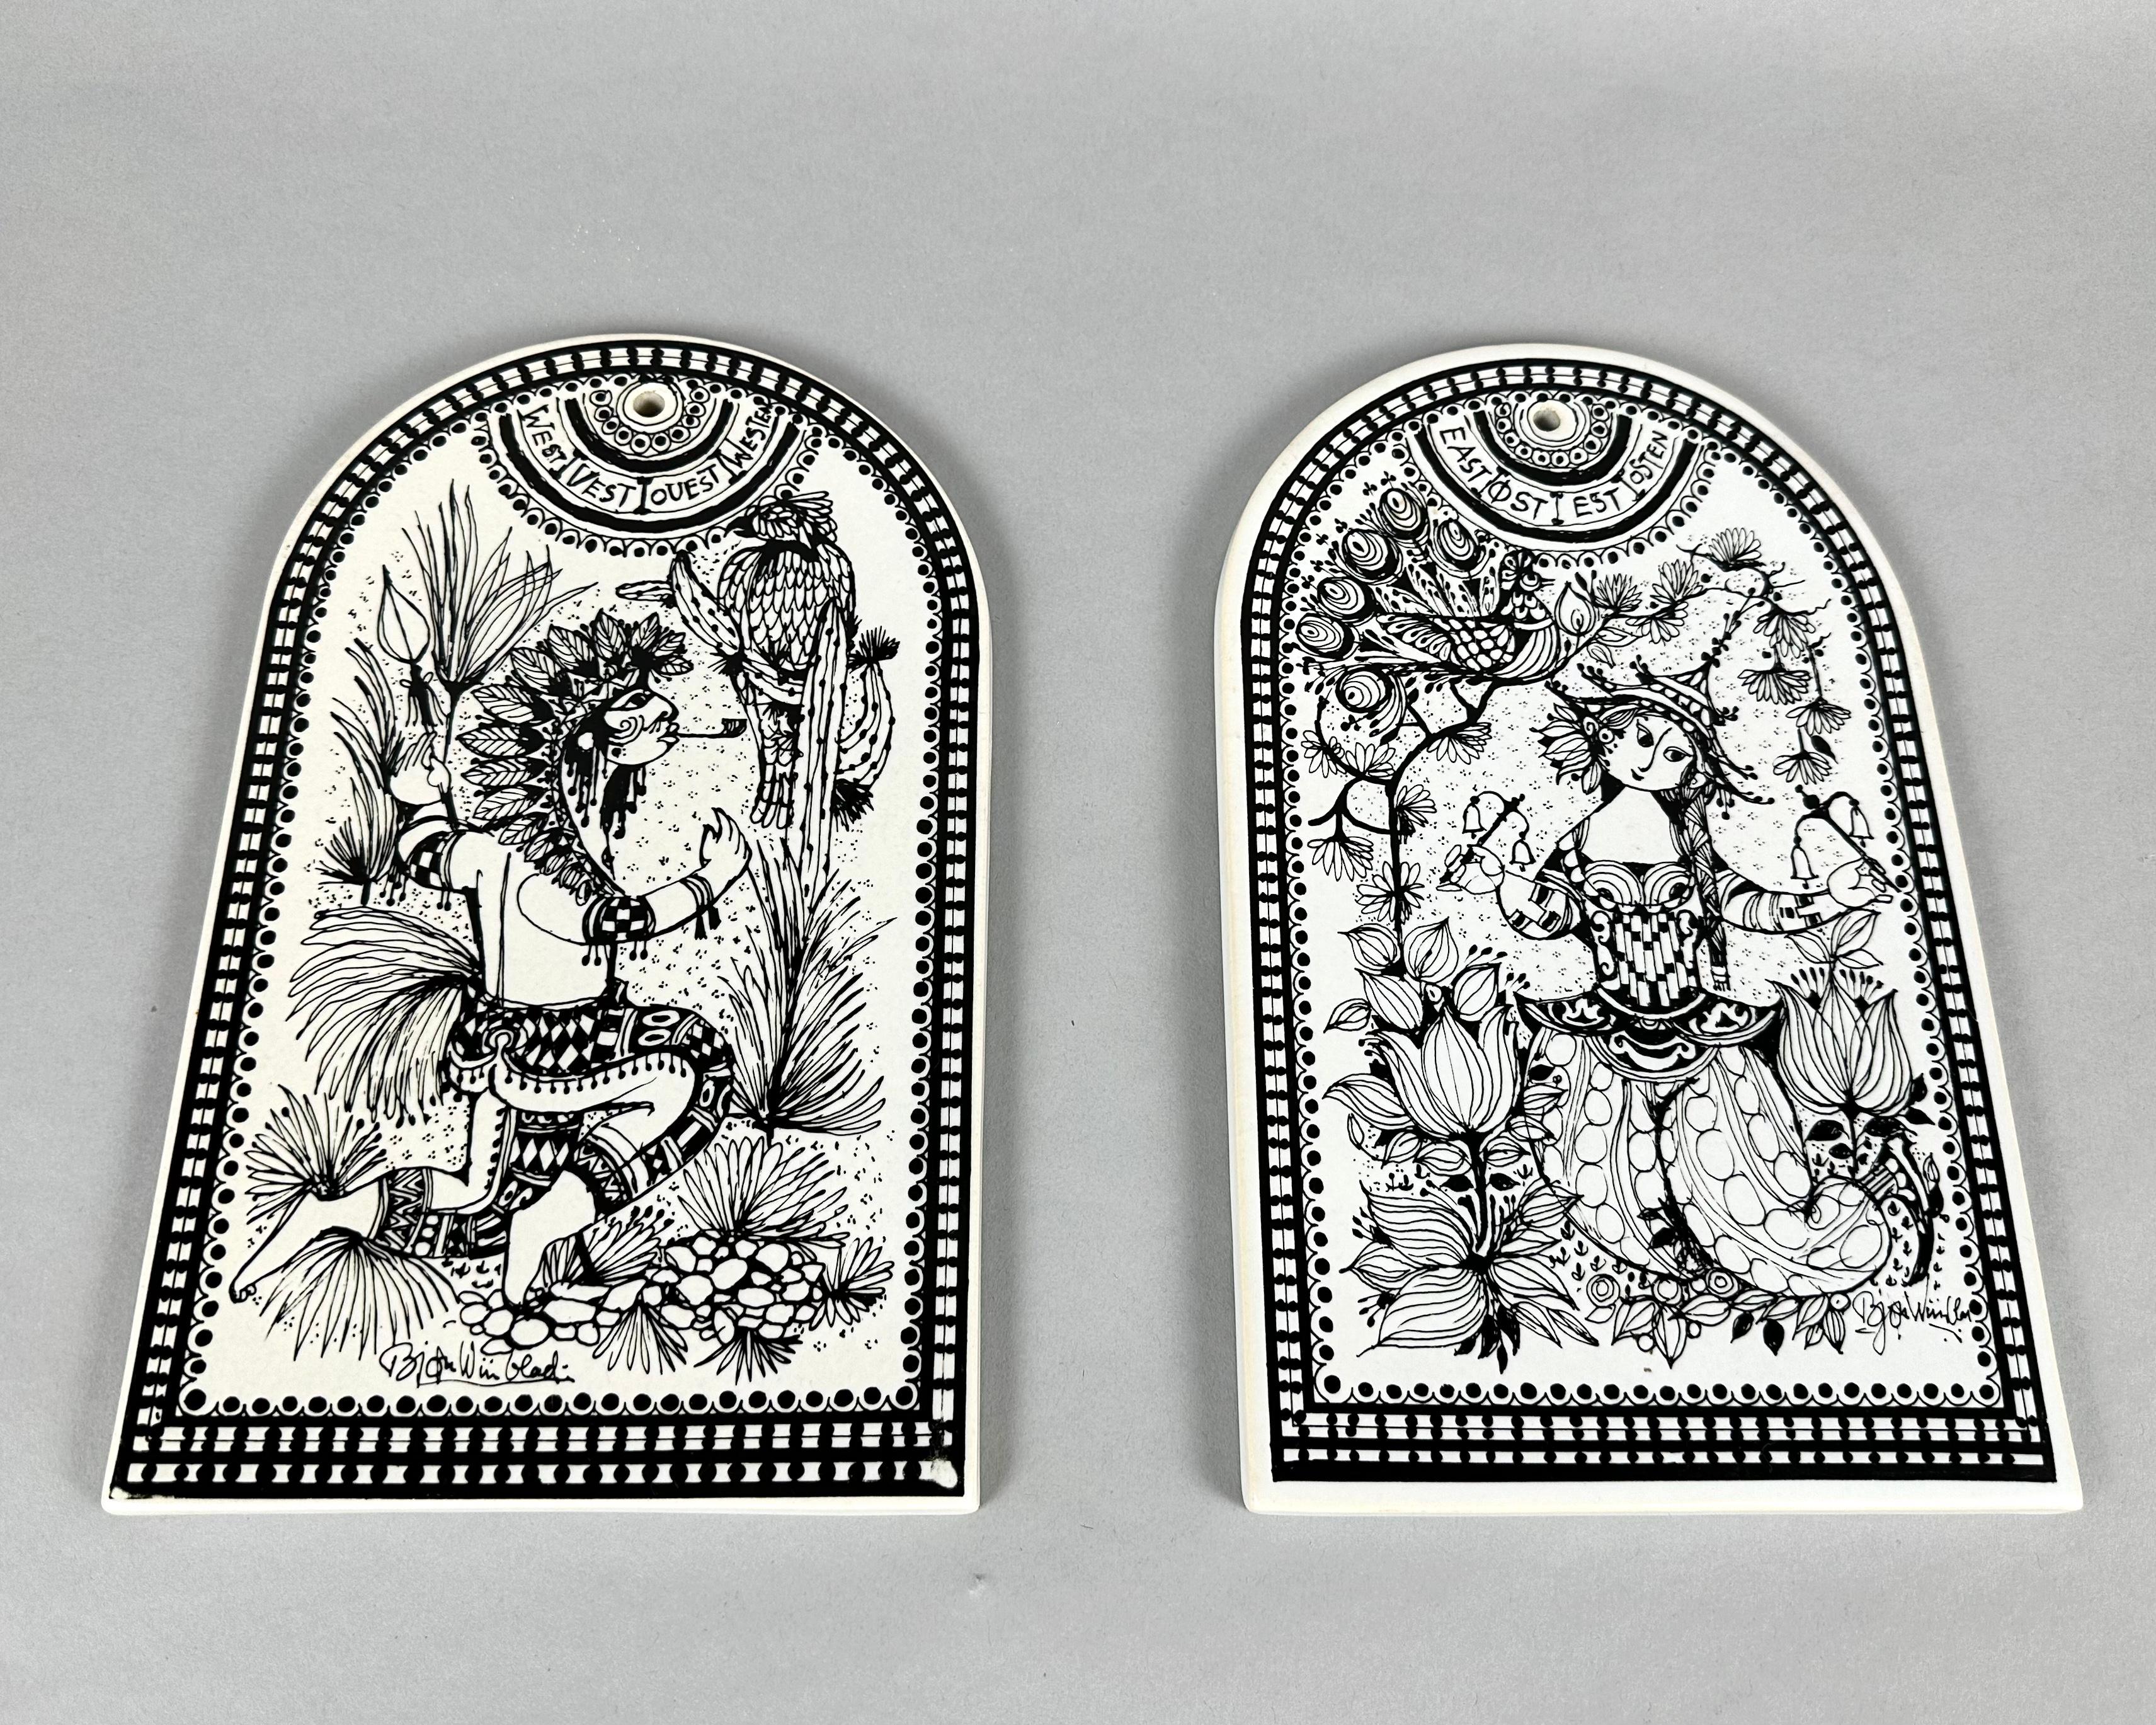 Rosenthal Studio-Line, thick porcelain cutting boards, breakfast boards, with black and white motifs by Danish designer Björn Winblad from the magical Four Heavens series, with an oriental theme, with a hole for attaching to the wall.

Germany,